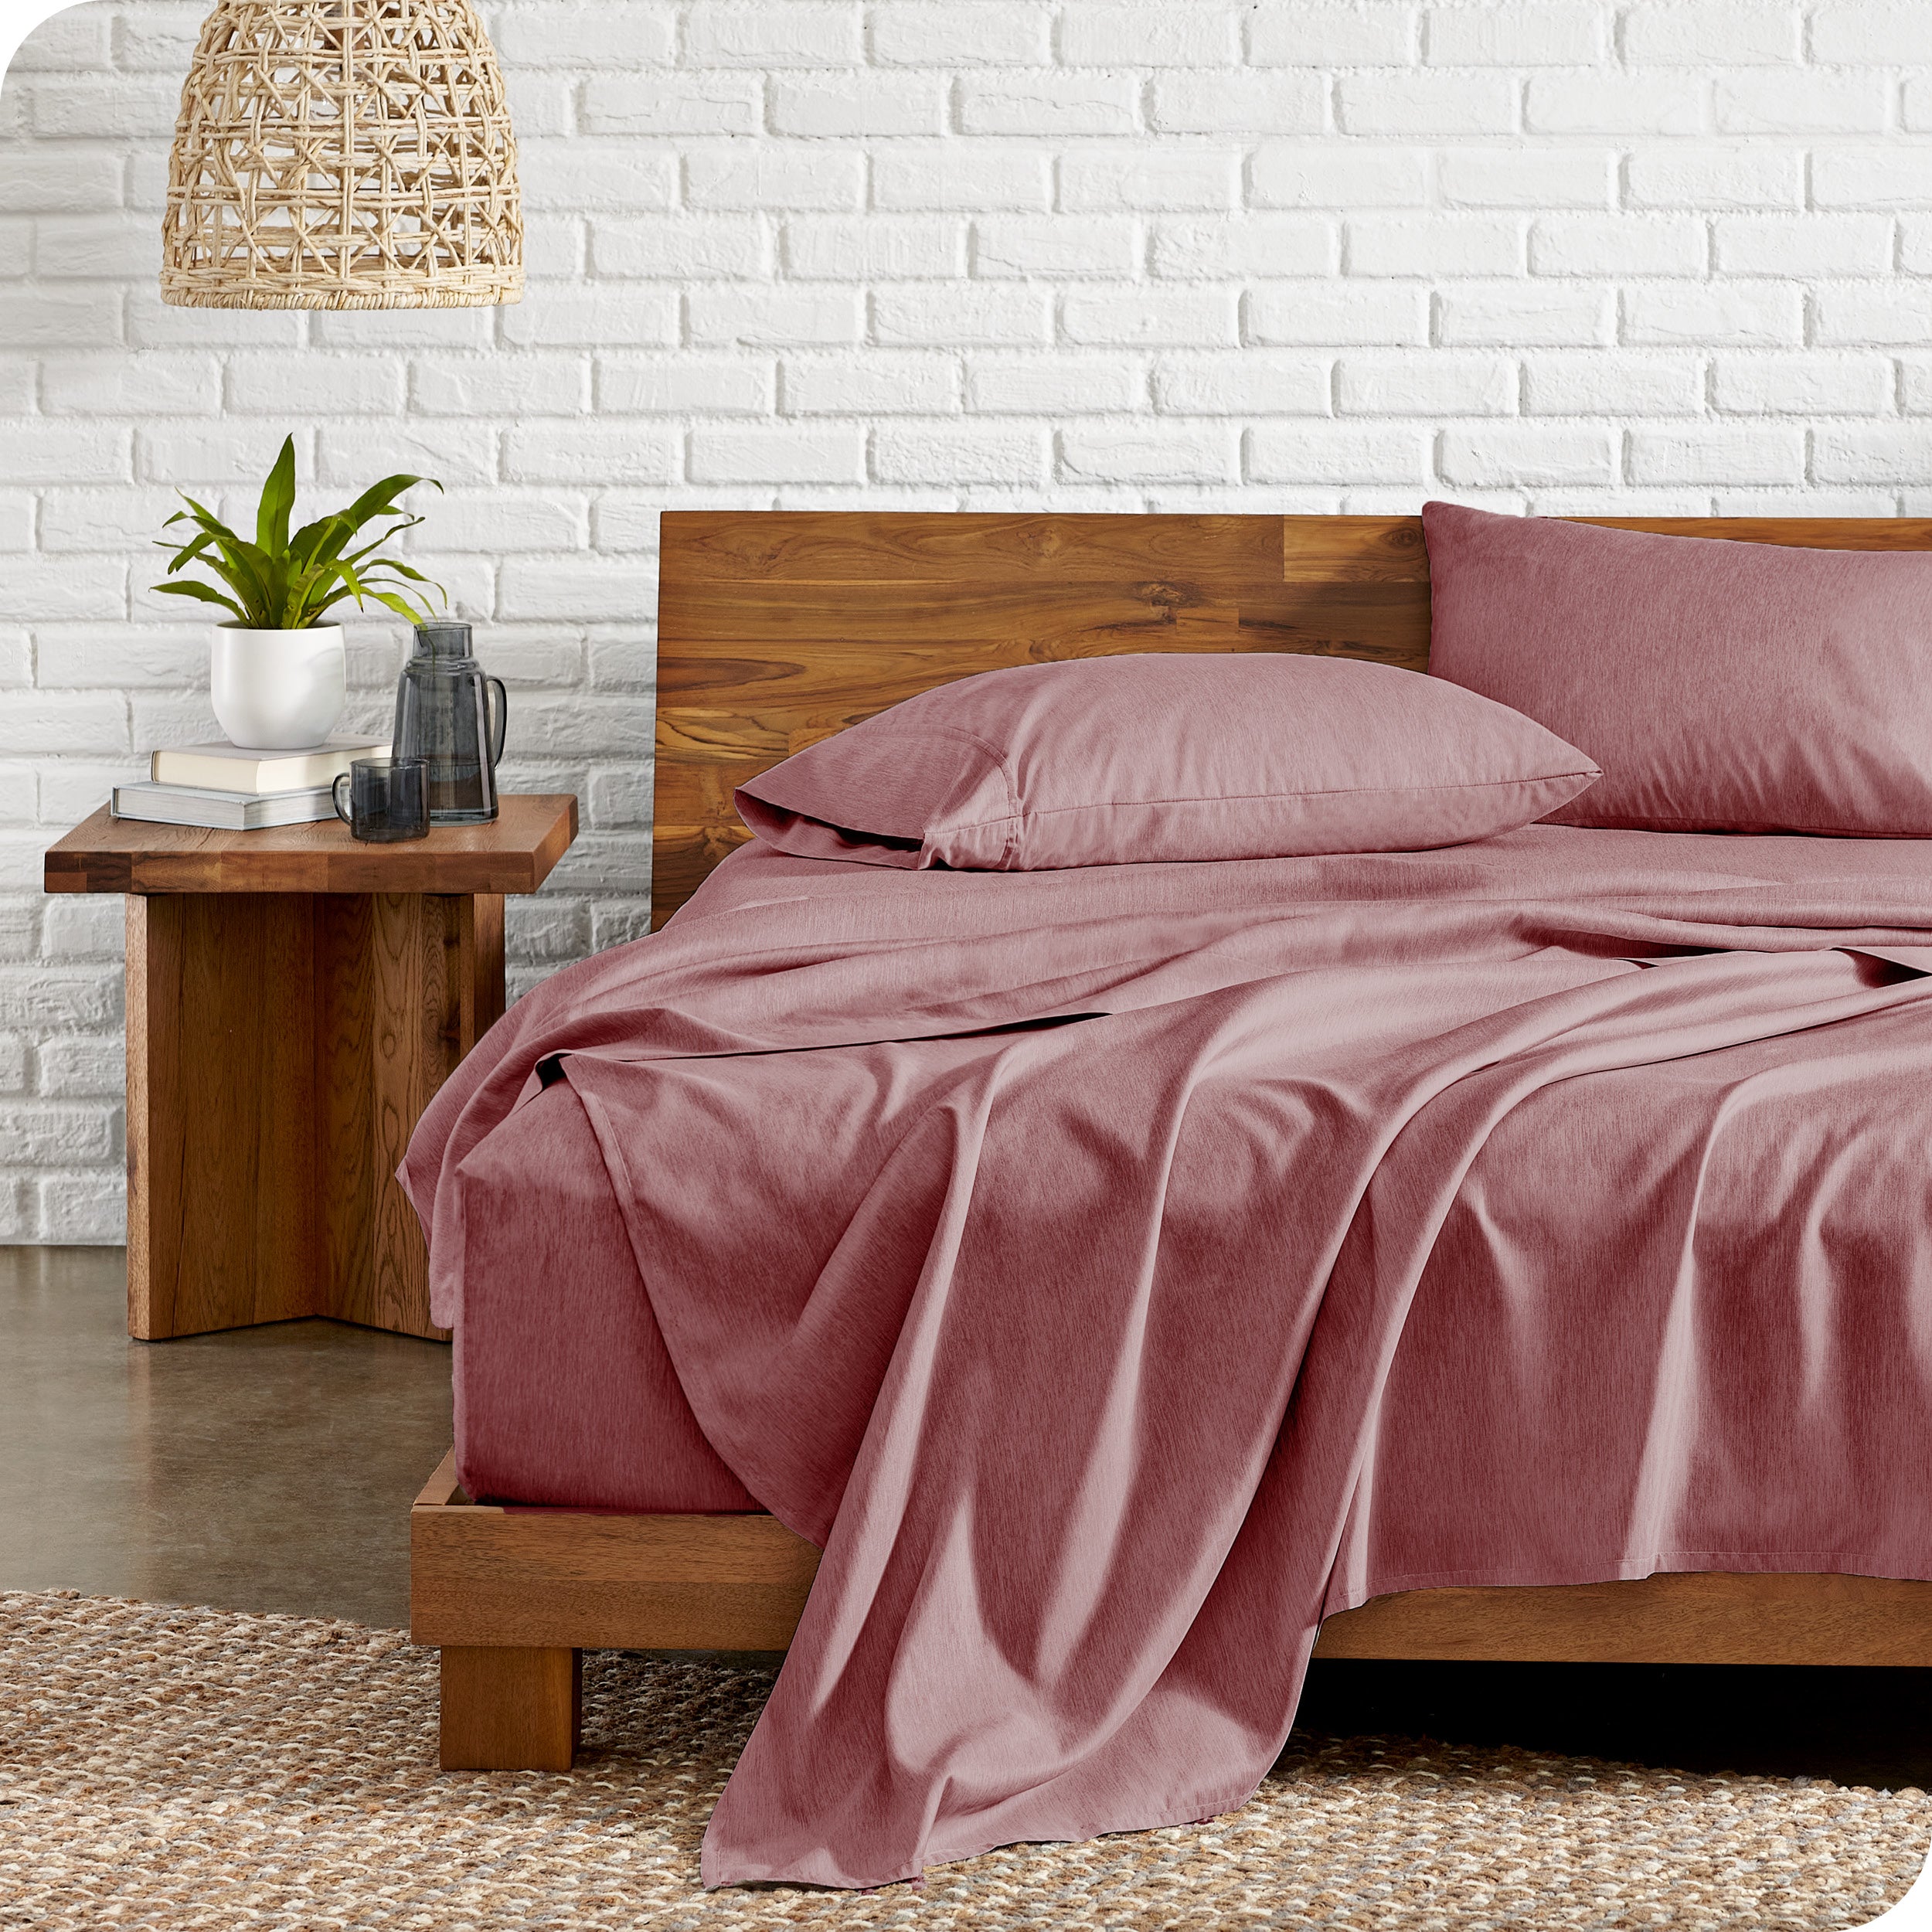 Microfiber sheets on a bed with a wooden headboard